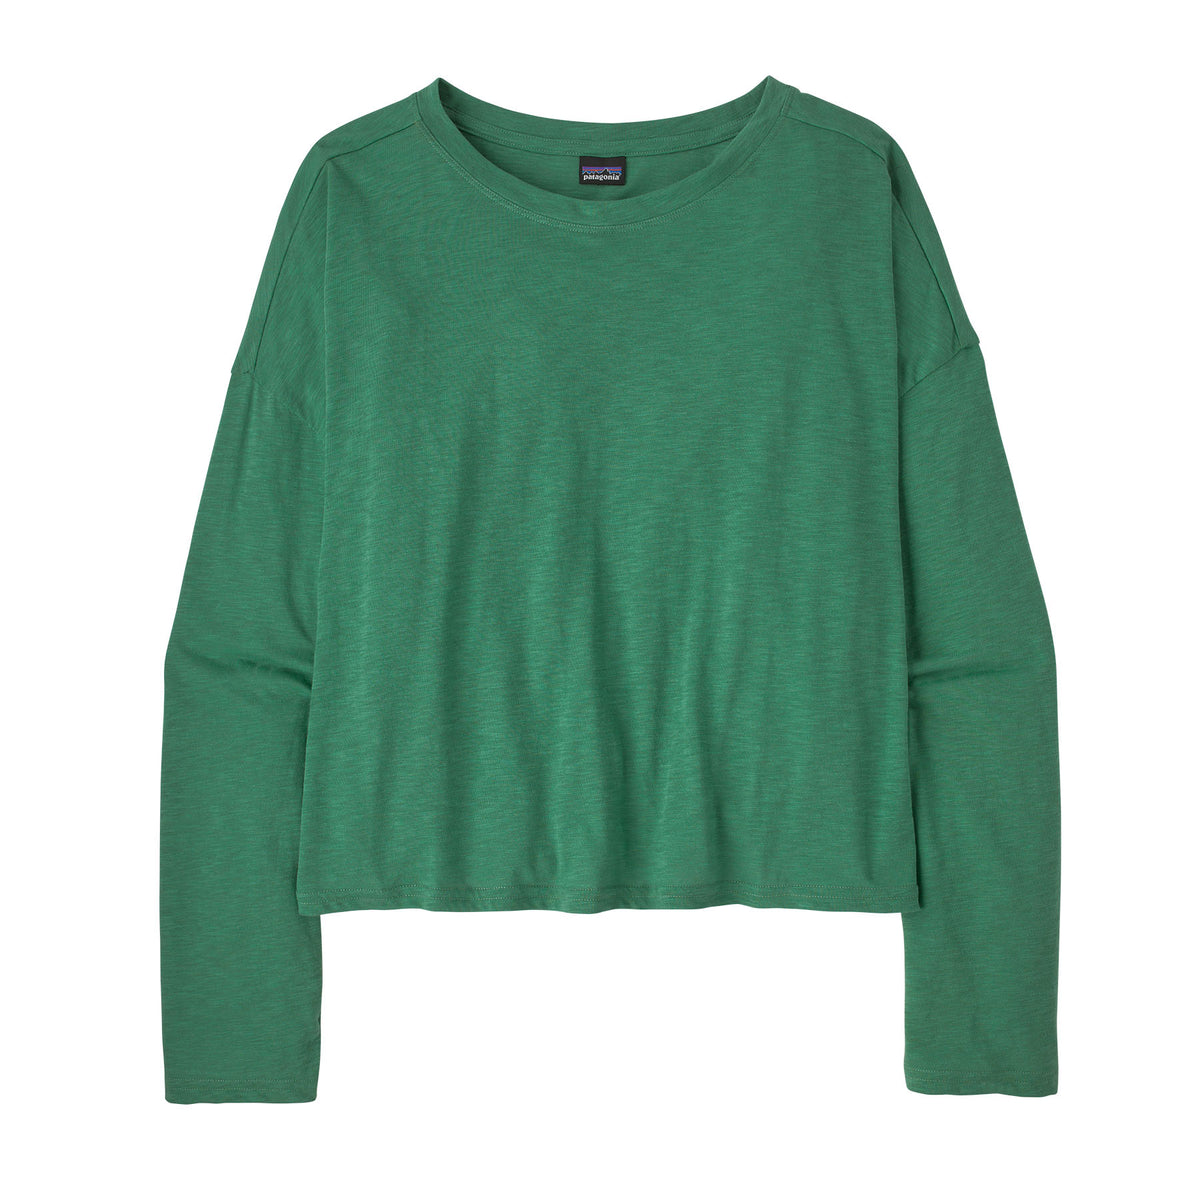 W's L/S Mainstay Top